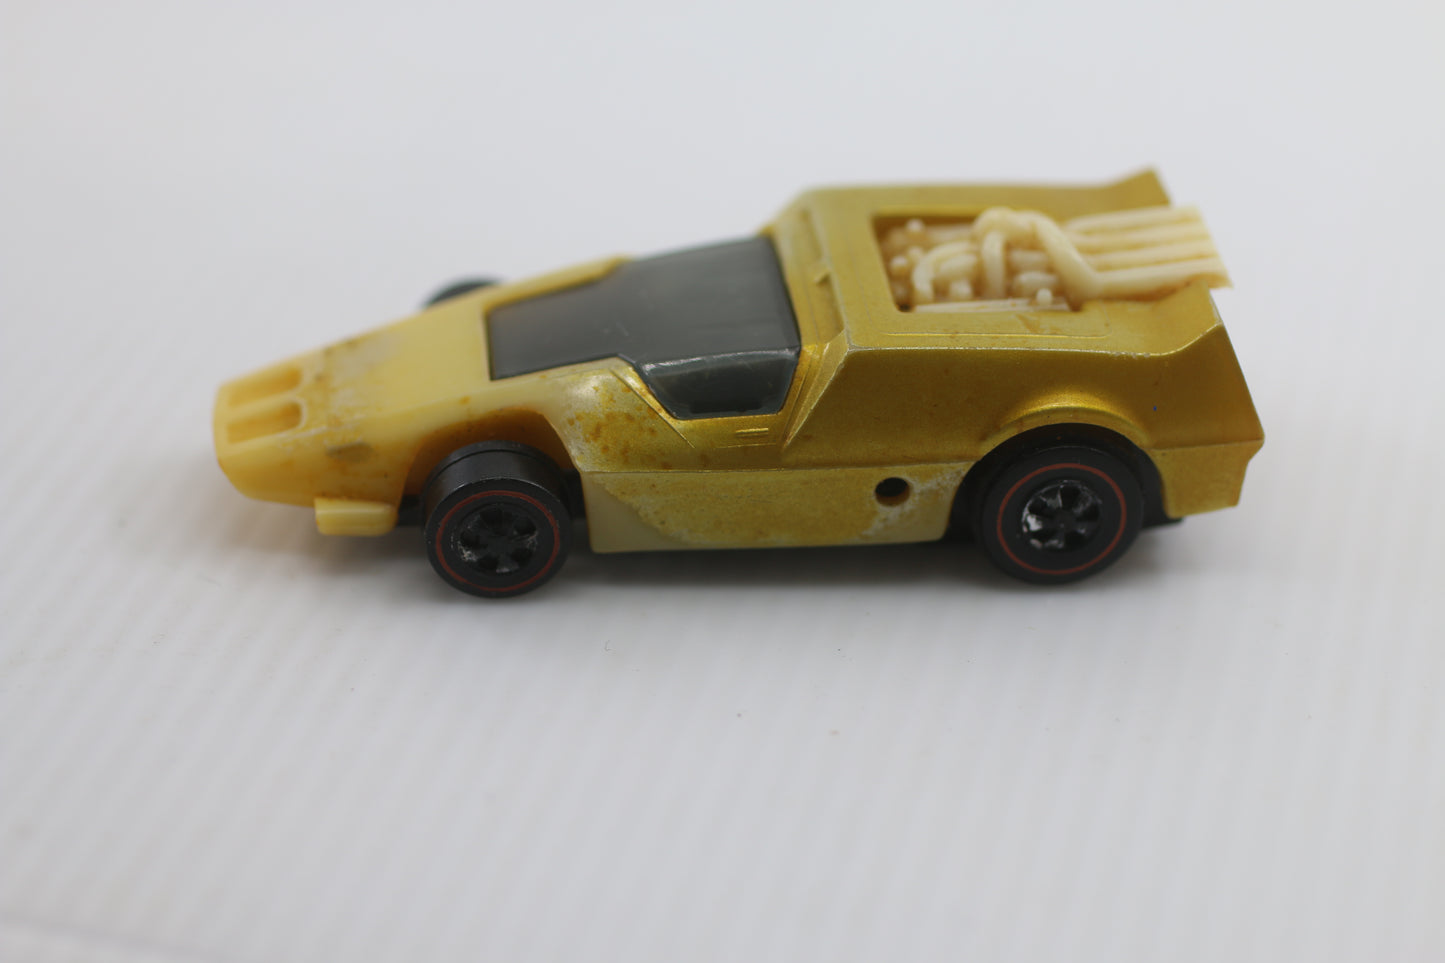 Mattel Hot Wheels Red Line Anteater Sizzler Toy Car, Yellow, 1969